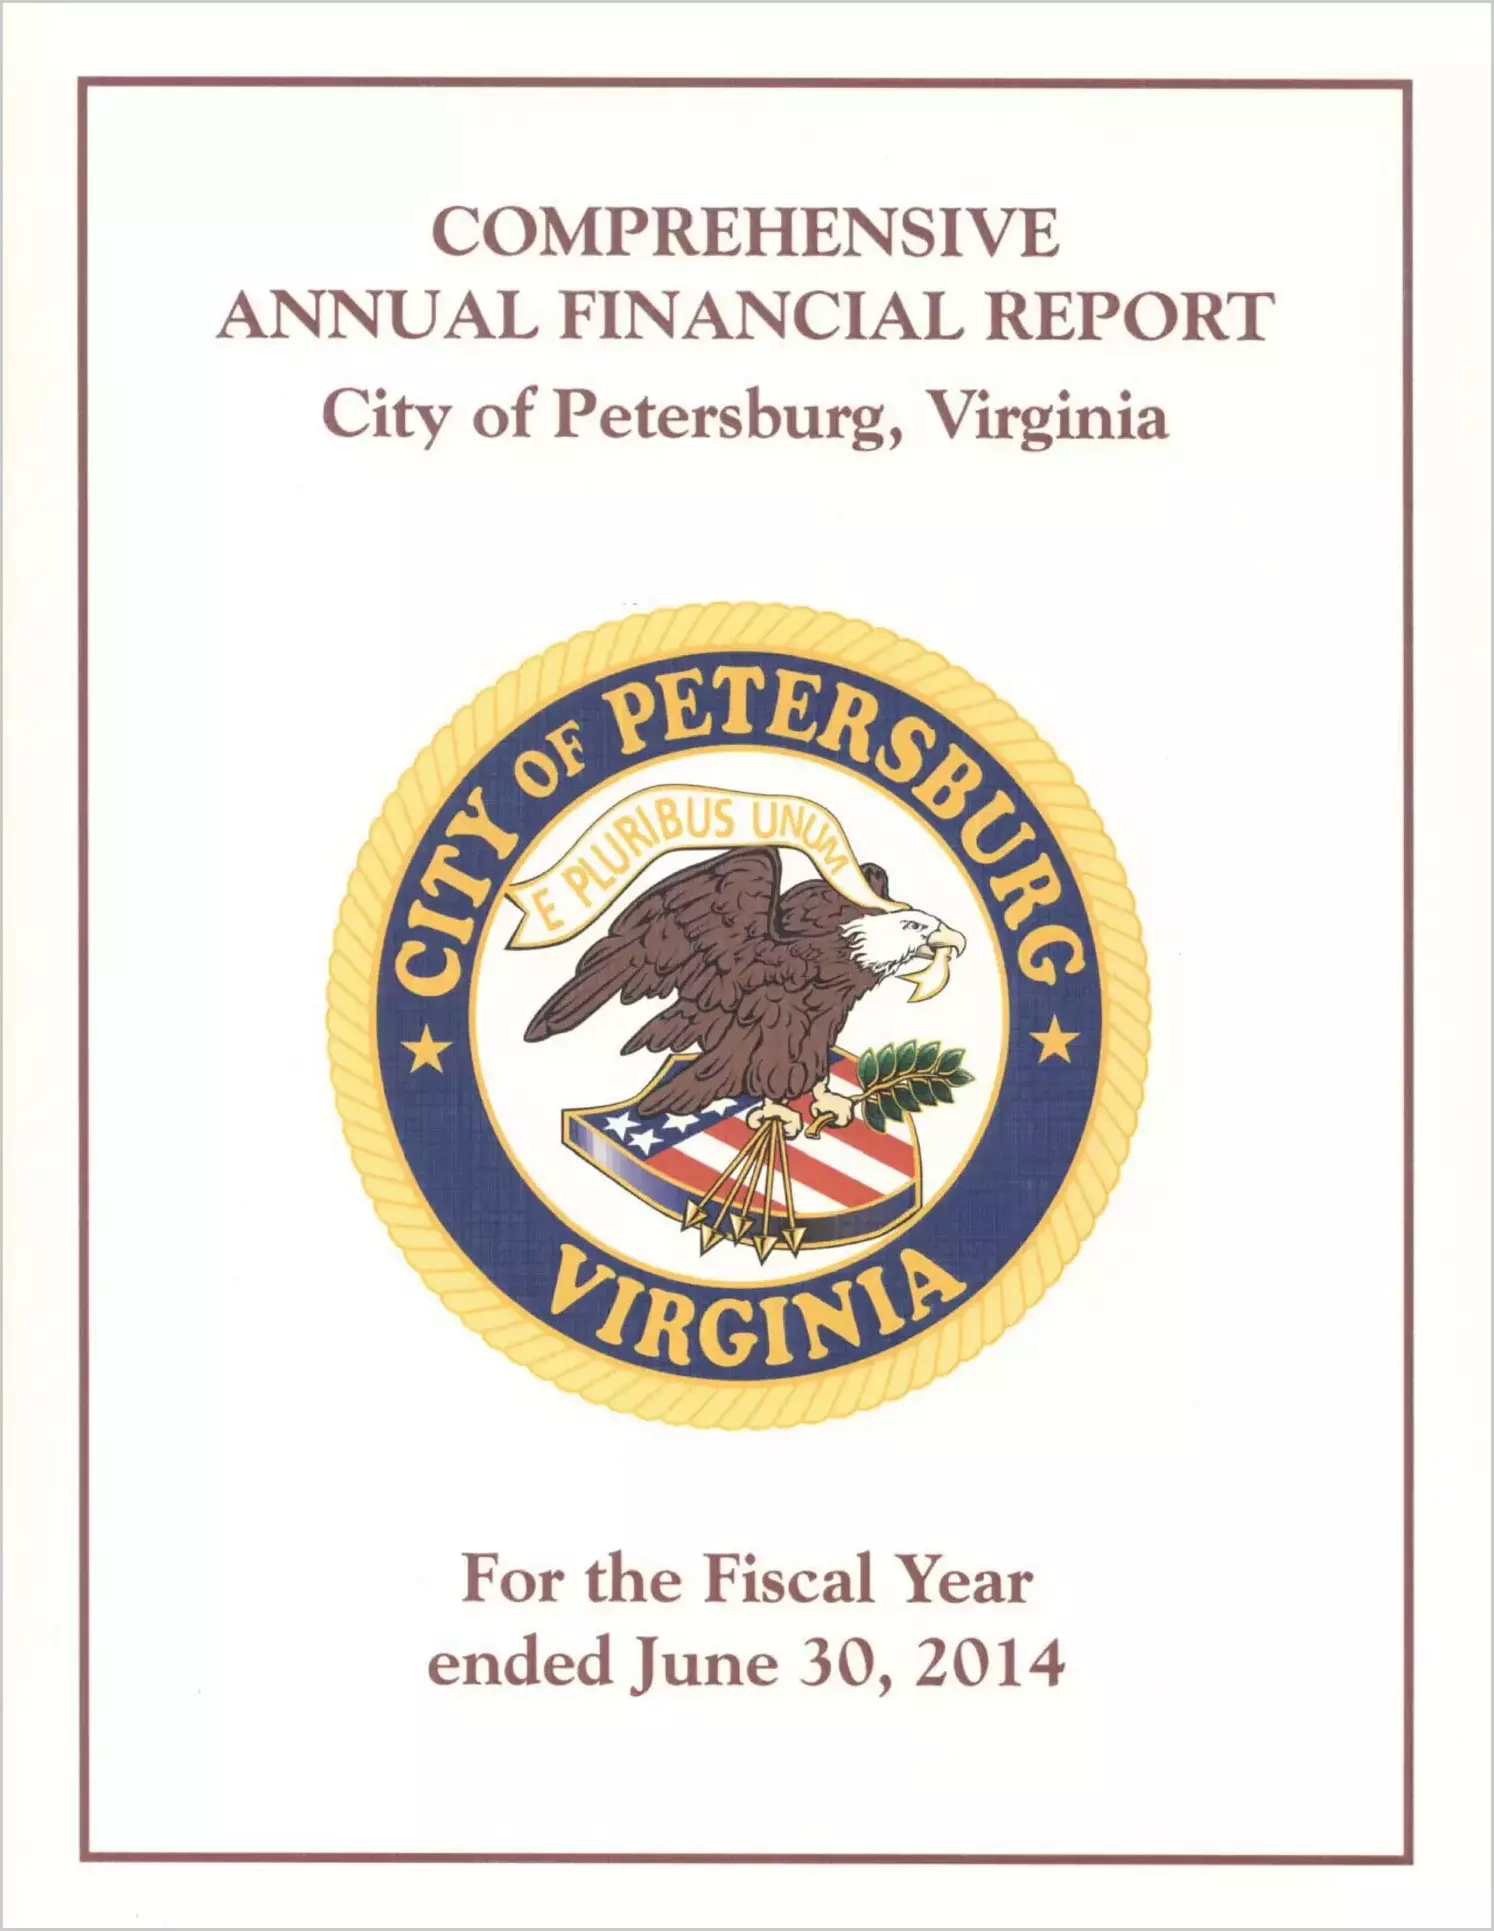 2014 Annual Financial Report for City of Petersburg